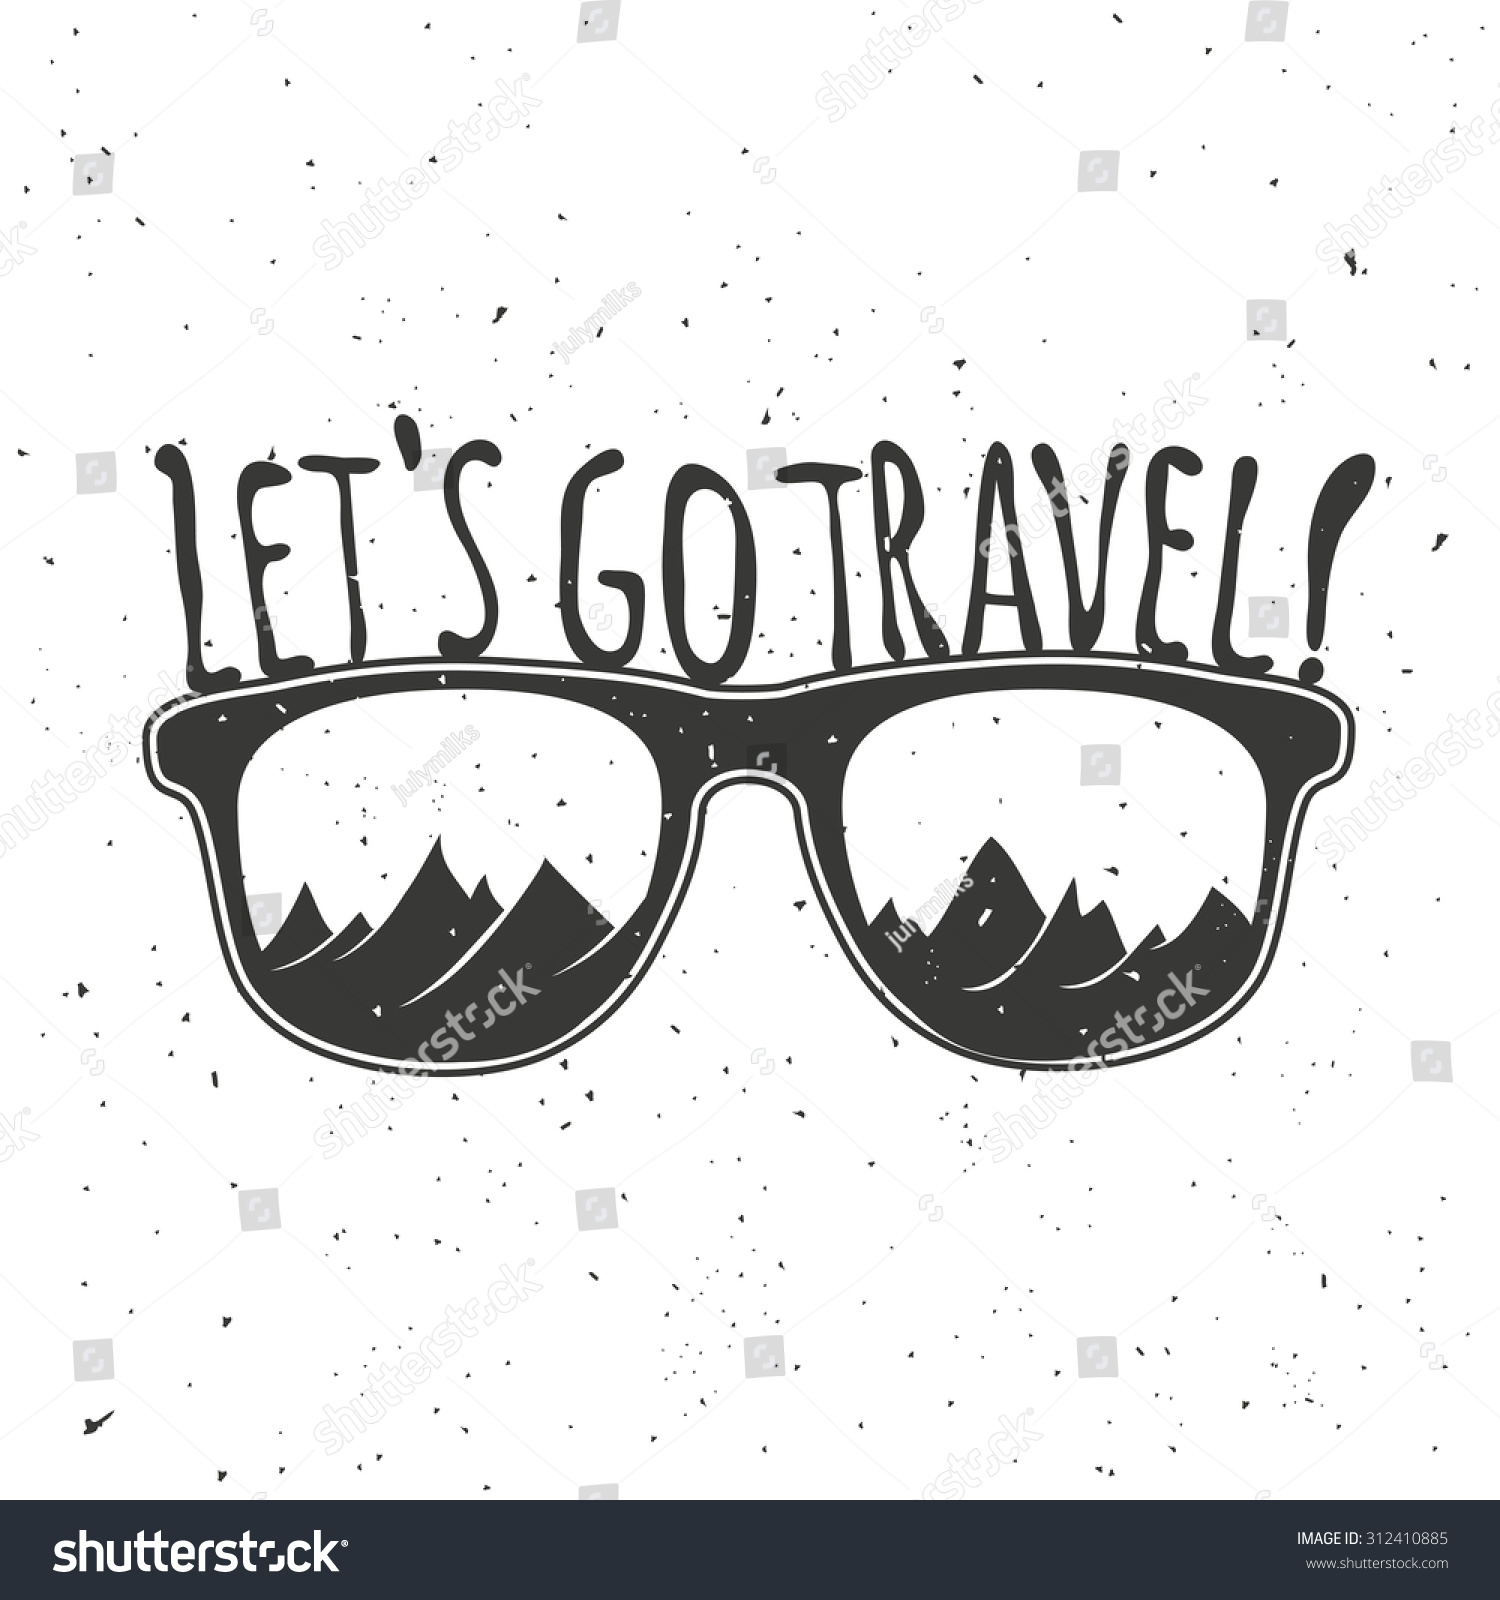 Lets Go Travel Vintage Hipster Vector Stock Vector